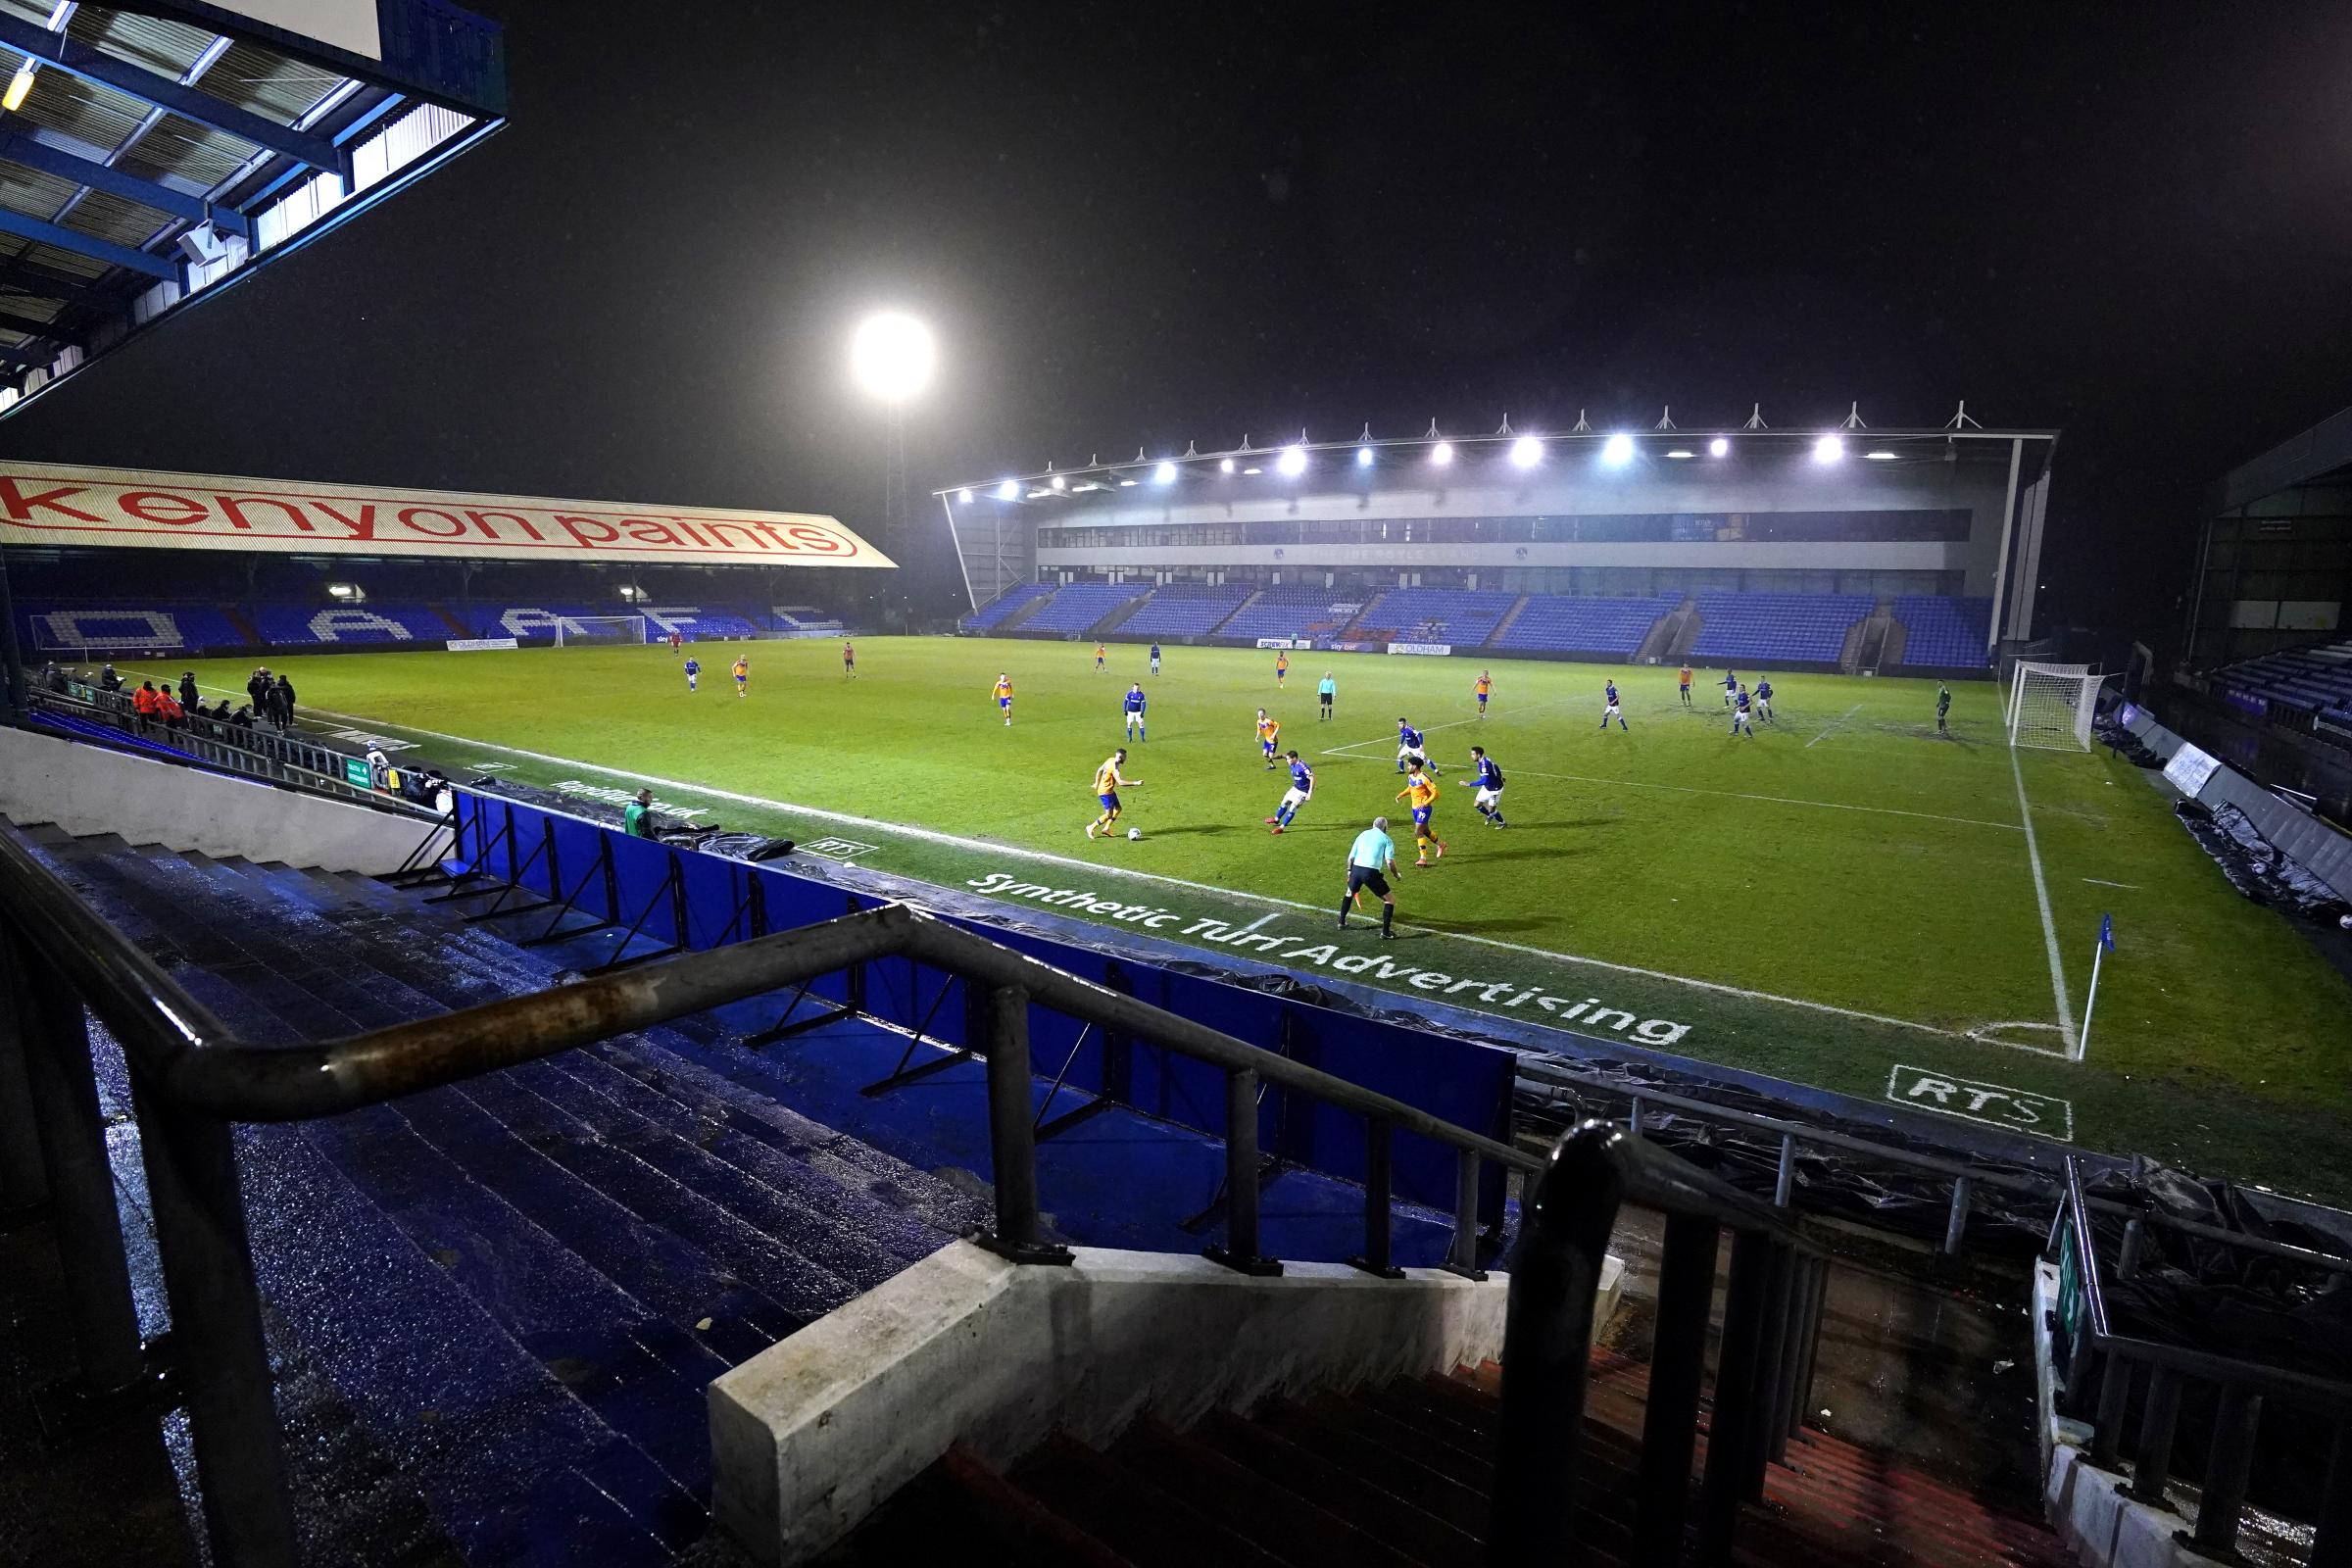 Supporters are hoping for better times ahead when they return to Boundary Park